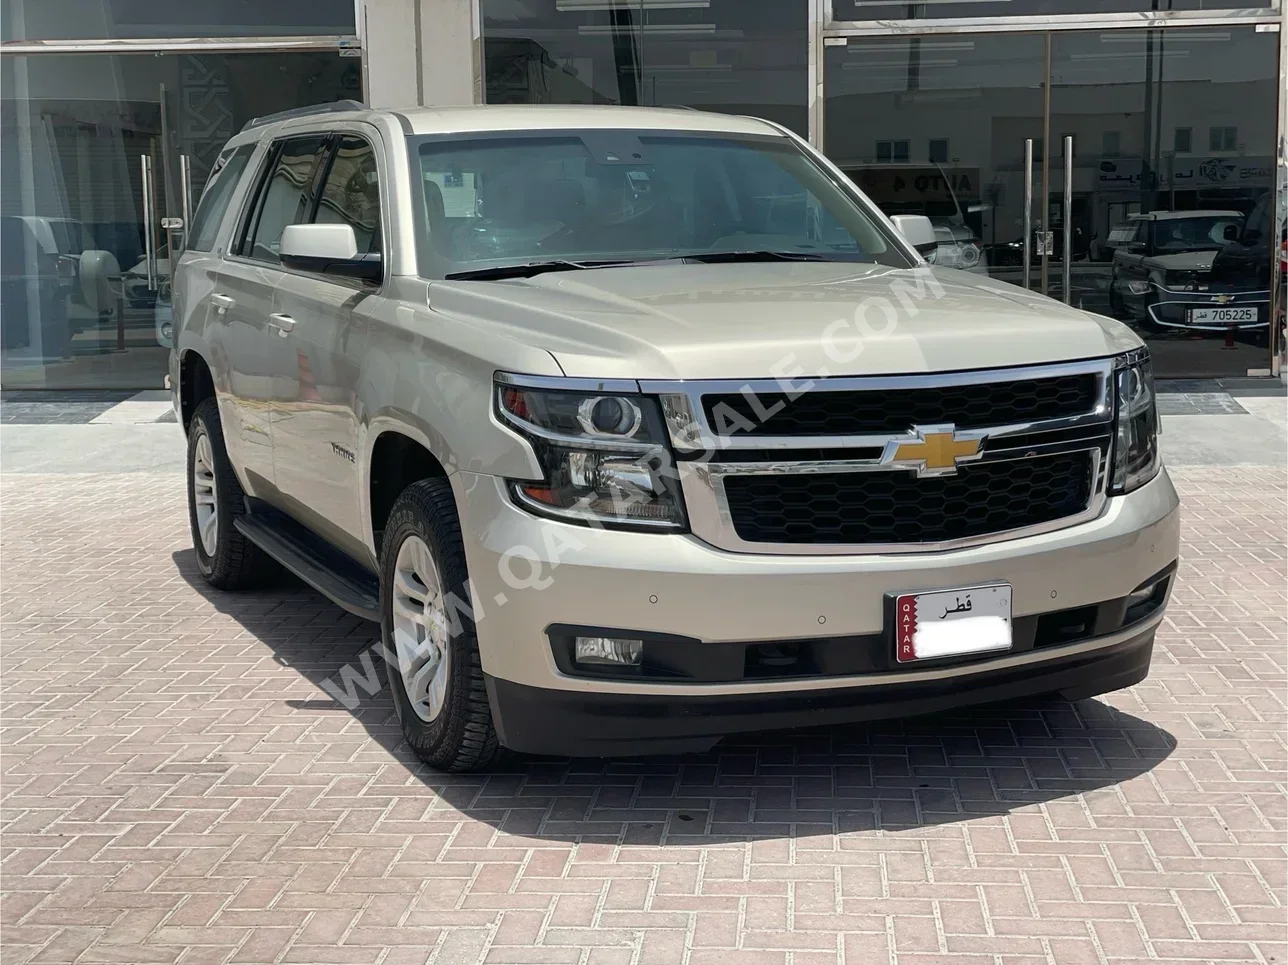 Chevrolet  Tahoe  LT  2016  Automatic  166,000 Km  8 Cylinder  Four Wheel Drive (4WD)  SUV  Gold